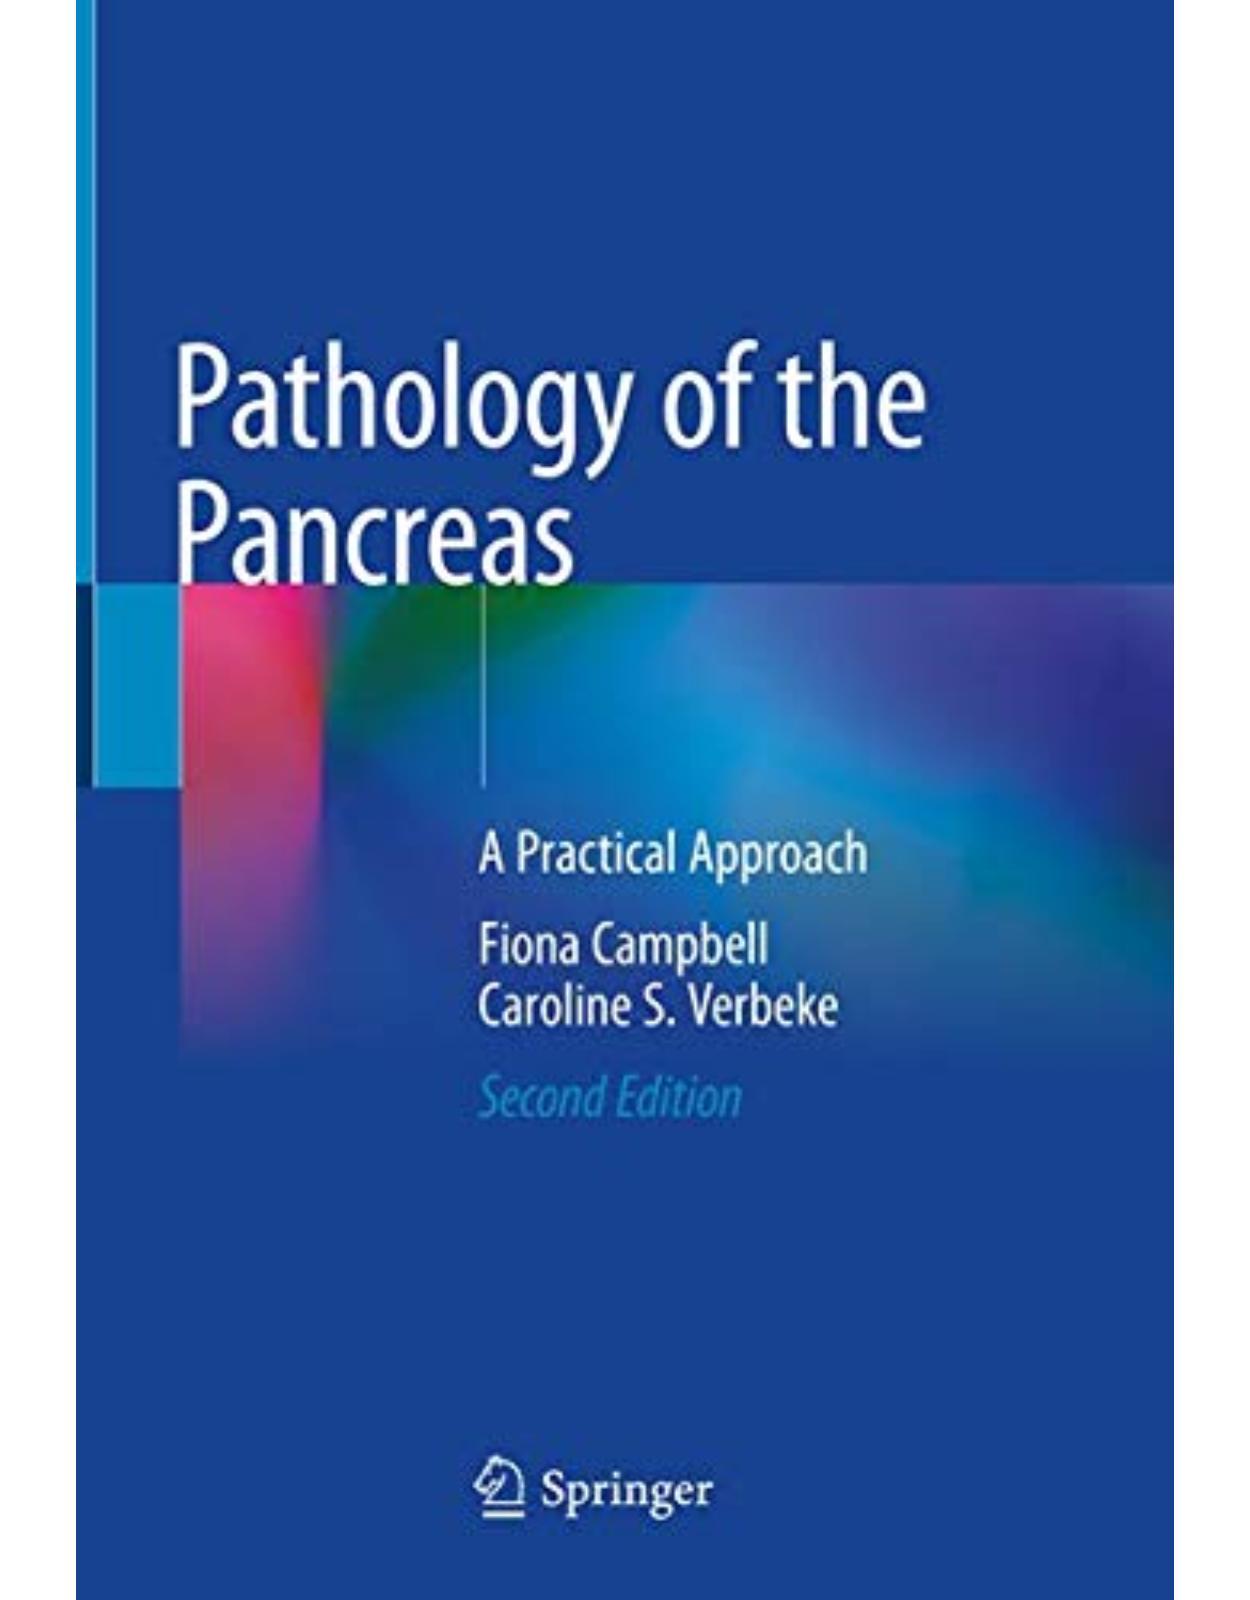 Pathology of the Pancreas: A Practical Approach 